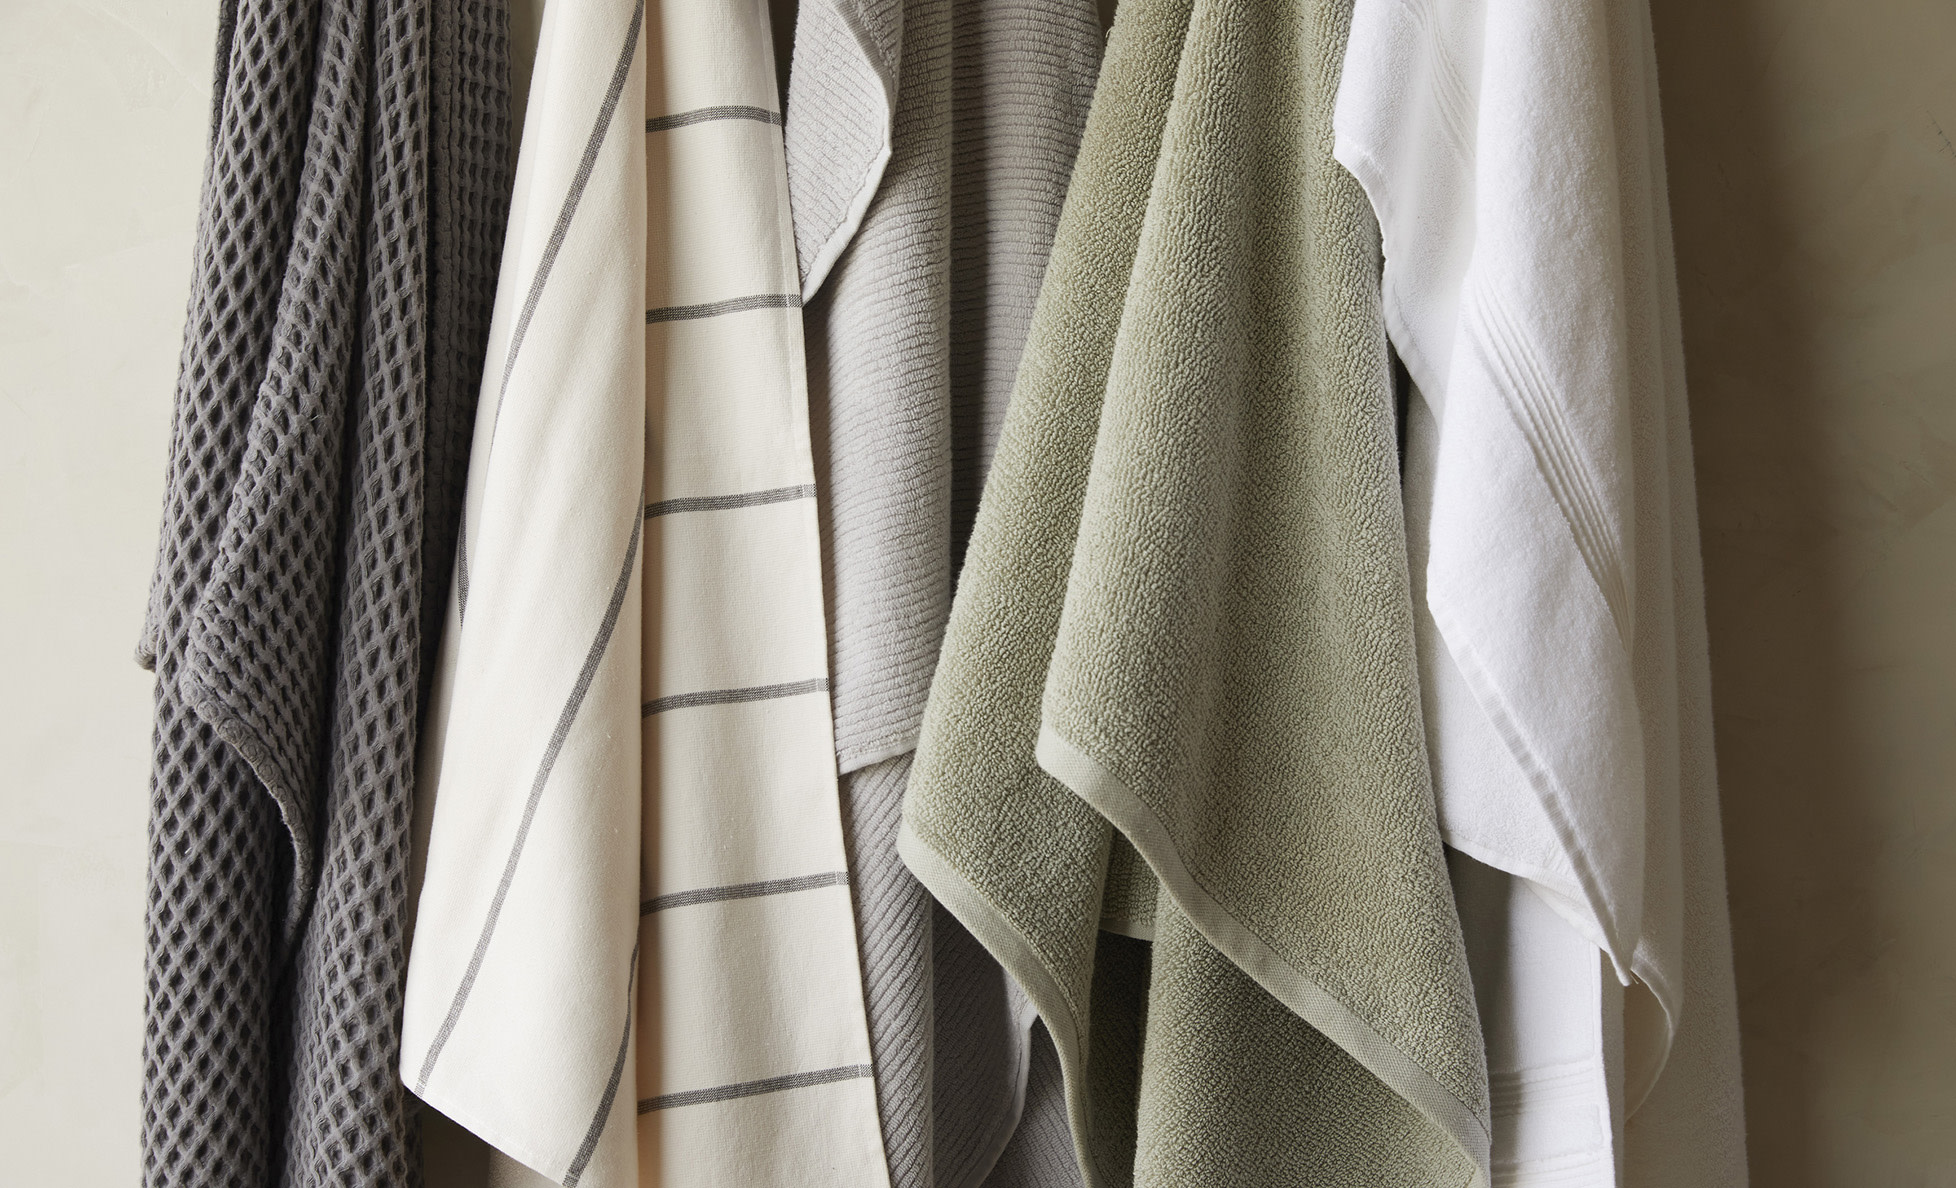 Variety of towels with different colors and textures hanging on hooks